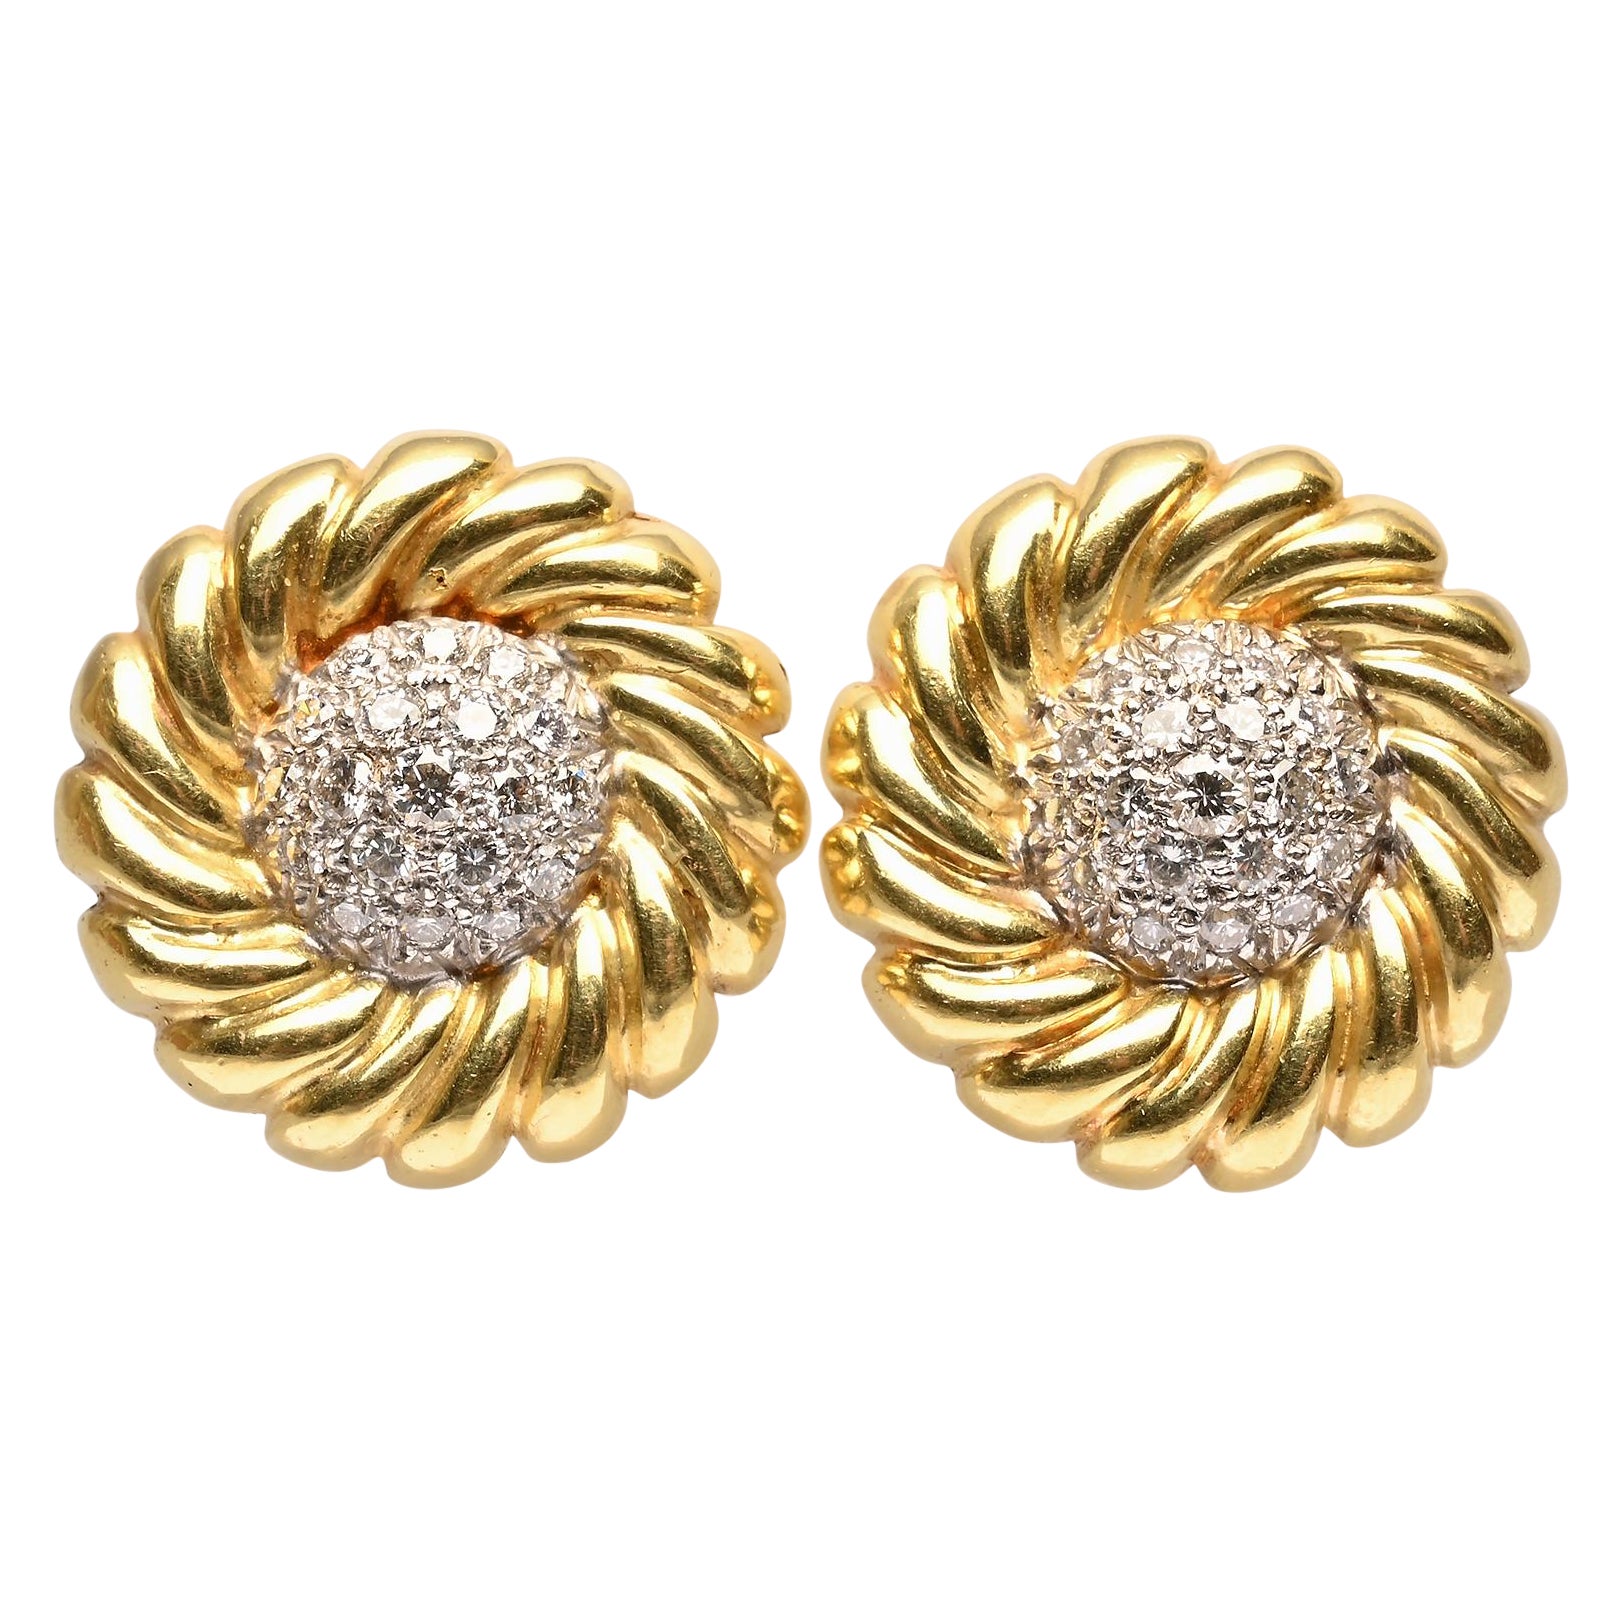 Stylish 18 karat gold earrings with a ribbed spiral encircling a center of diamonds. There are 38 diamonds weighing a total of 1 1/2 carats in a domed setting.
Clip backs can be converted to posts.
